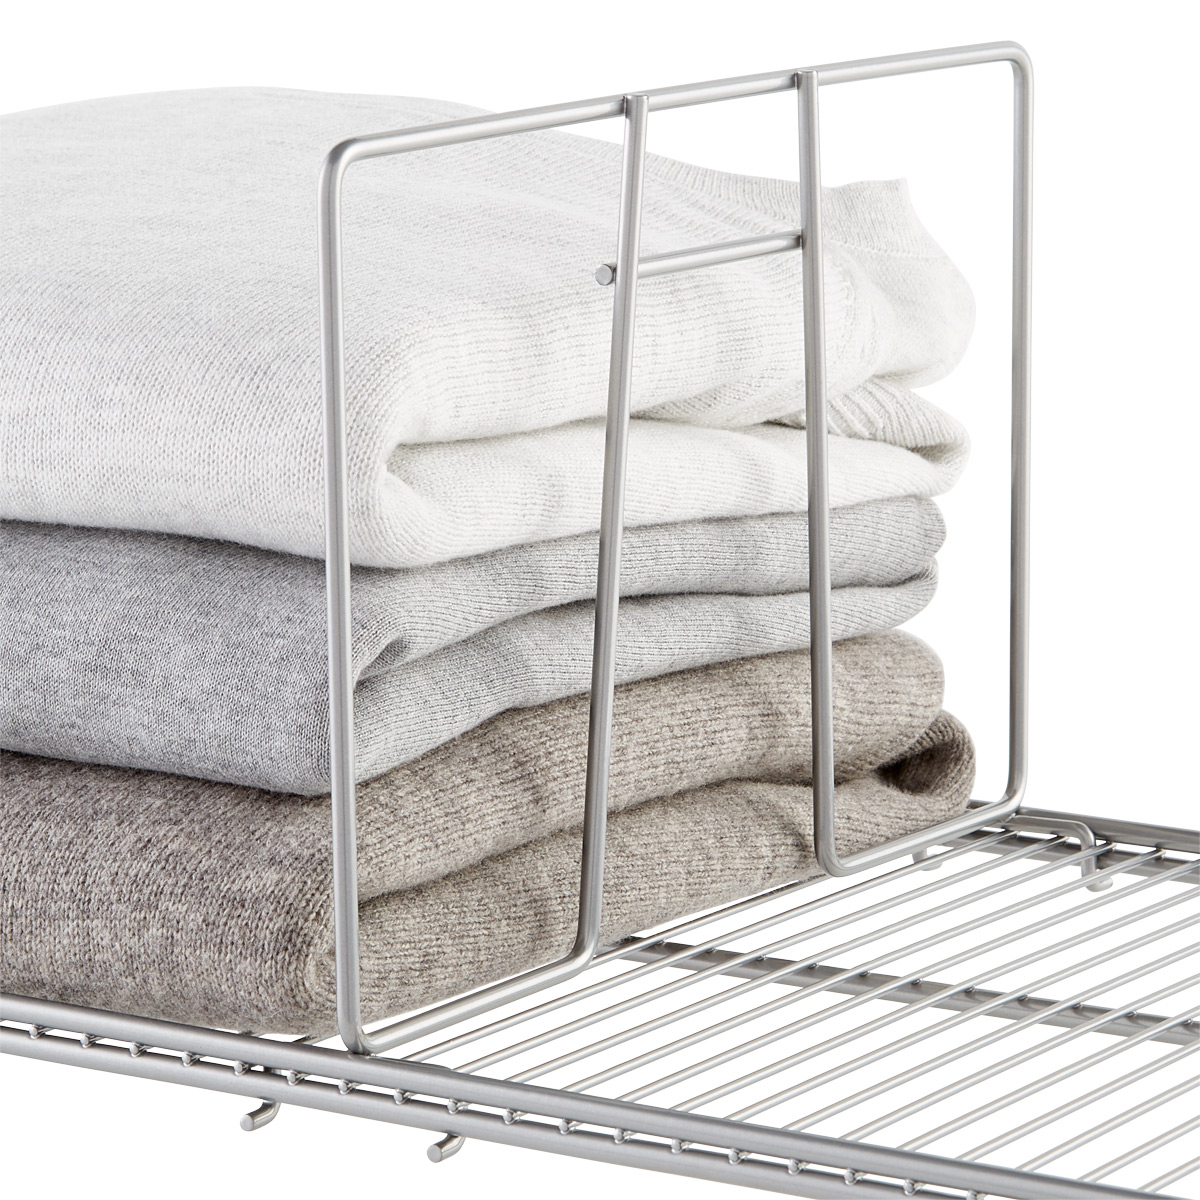 Elfa Ventilated Wire Shelf Dividers | The Container Store